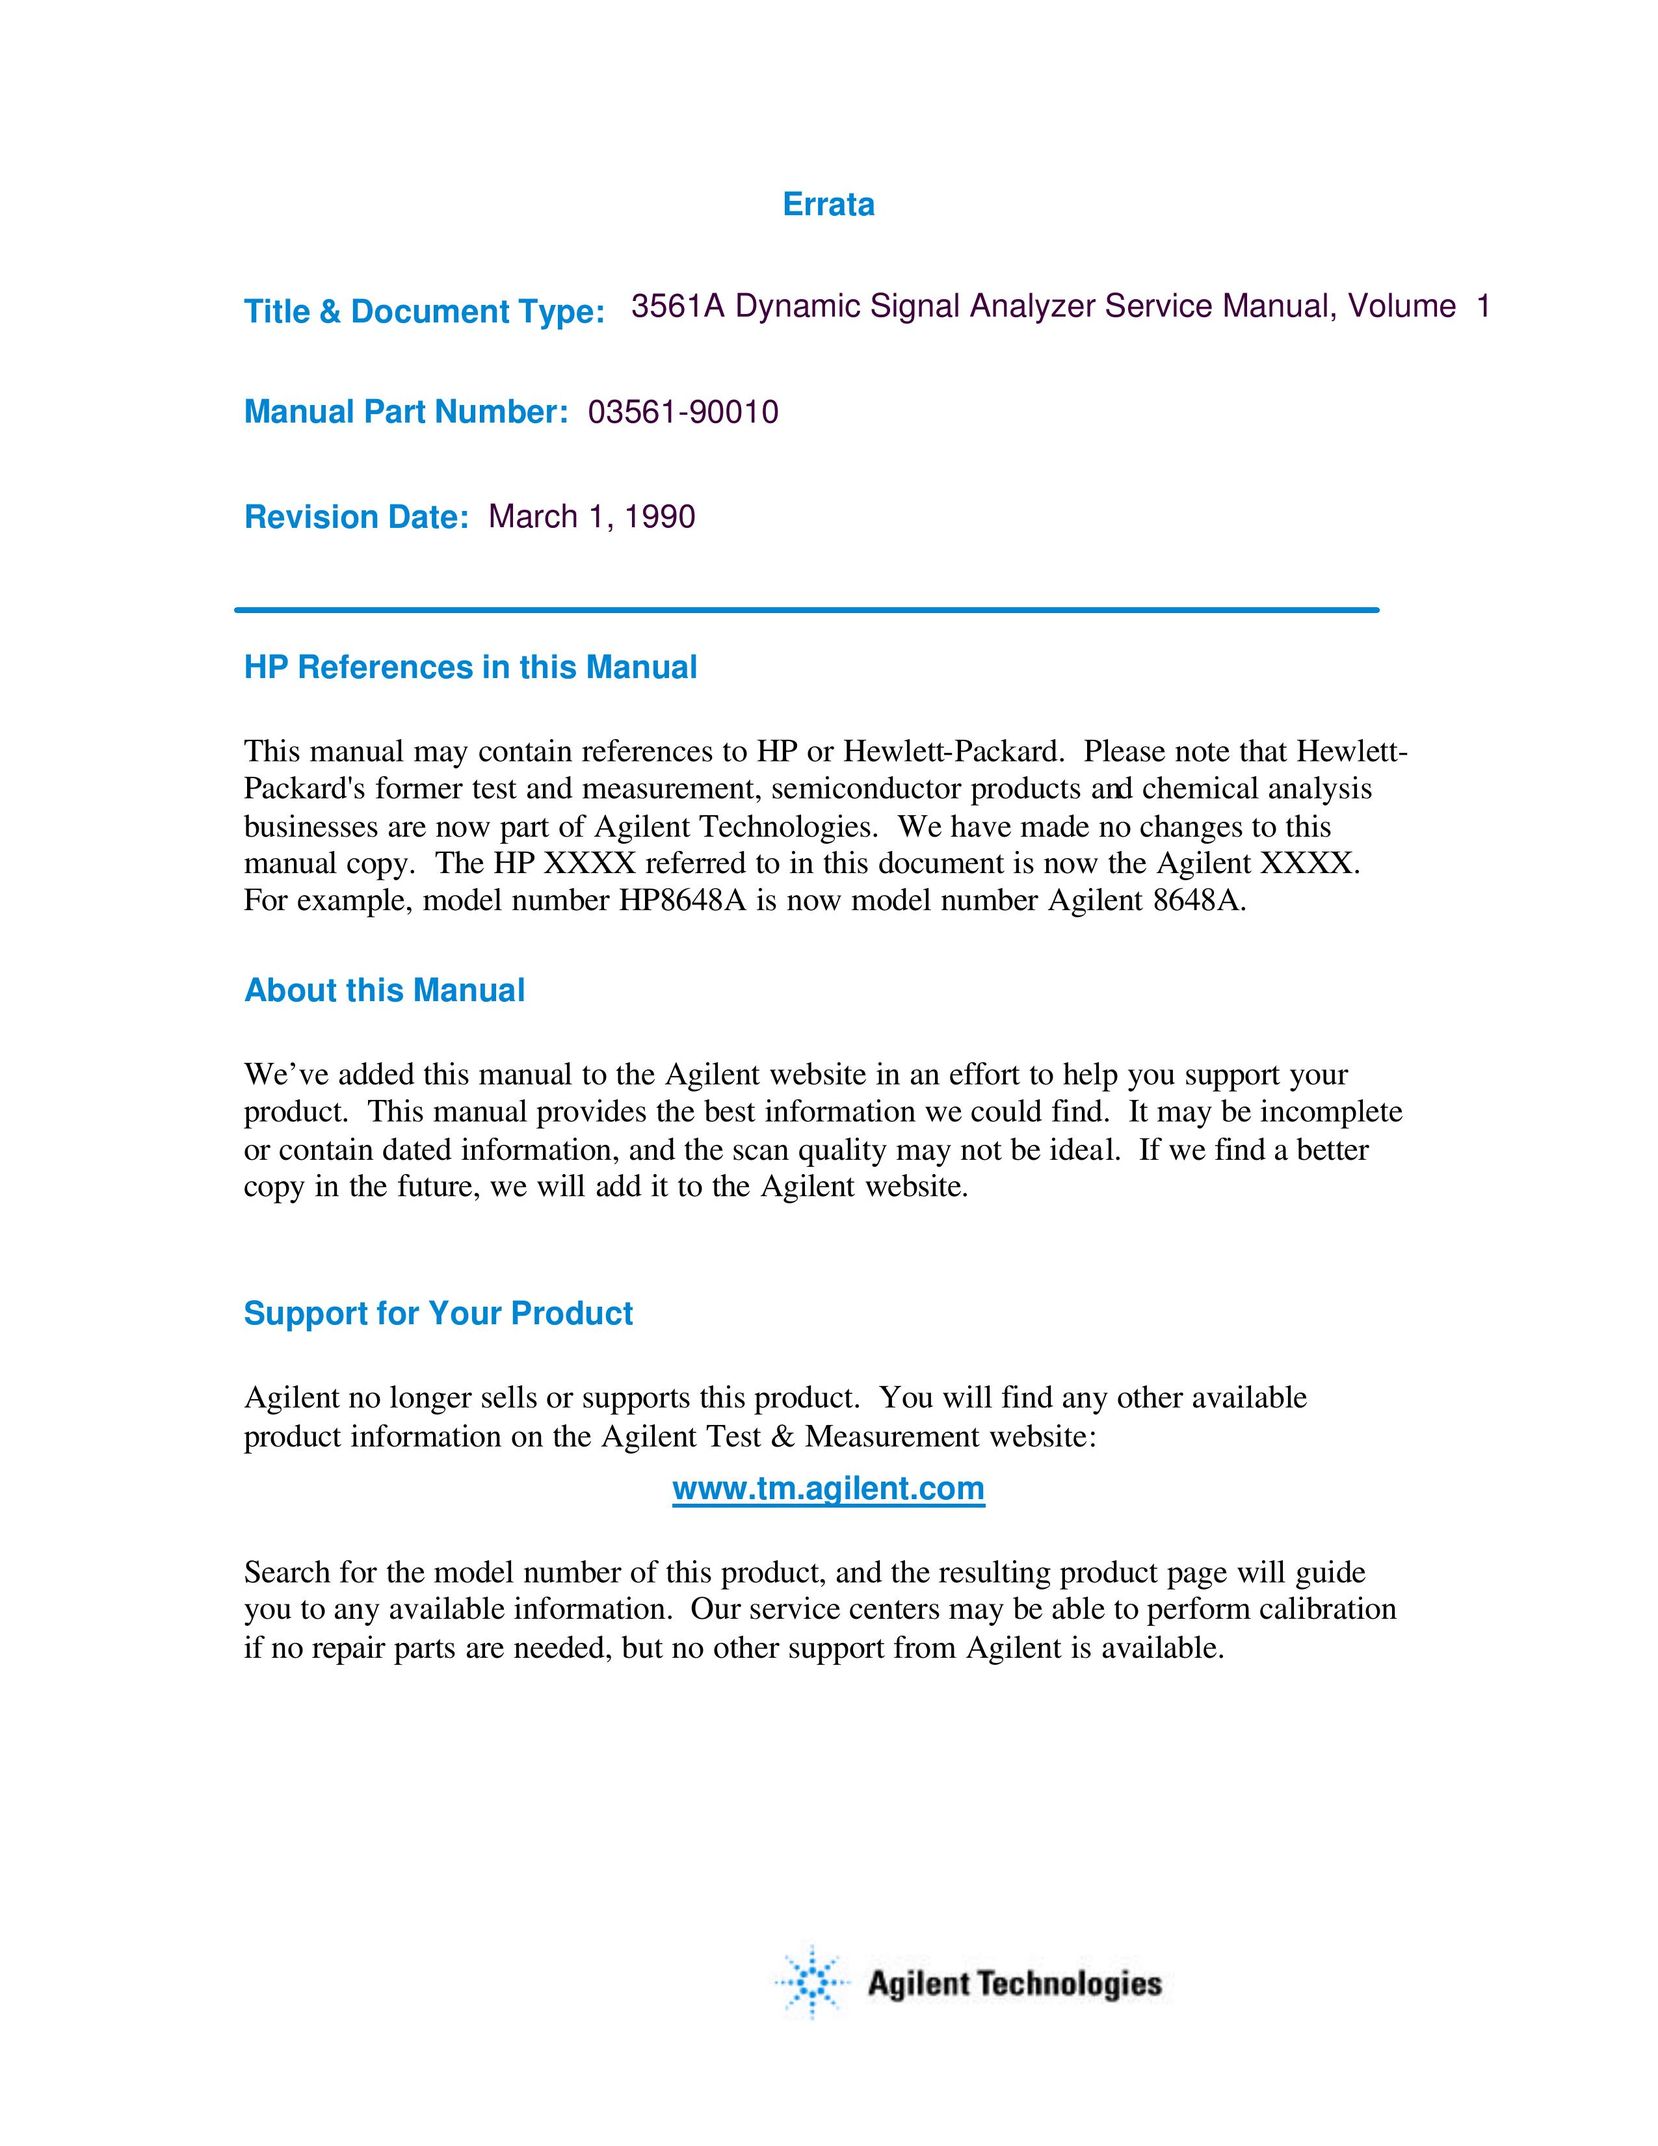 Agilent Technologies 03561-90010 All in One Printer User Manual (Page 1)